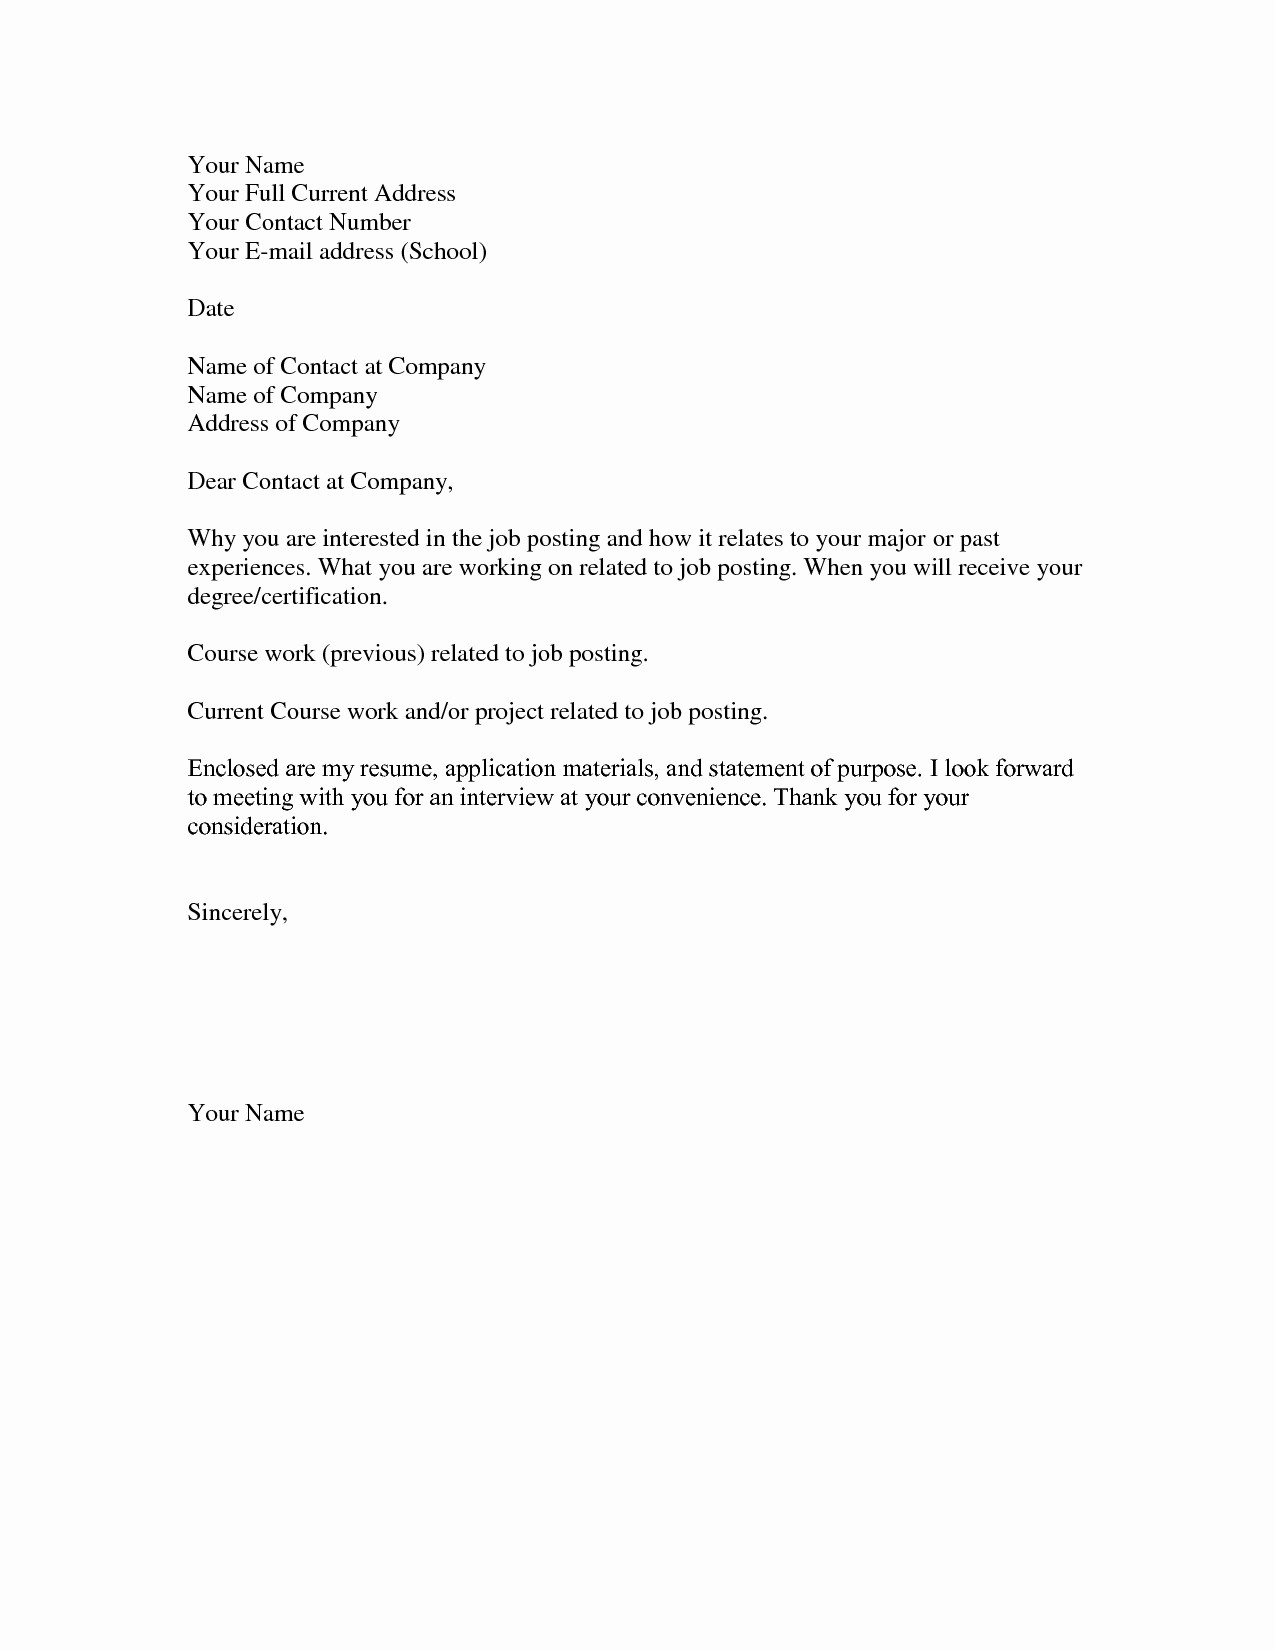 Sample Of Simple Cover Letter Beautiful Basic Cover Letter for A Resume